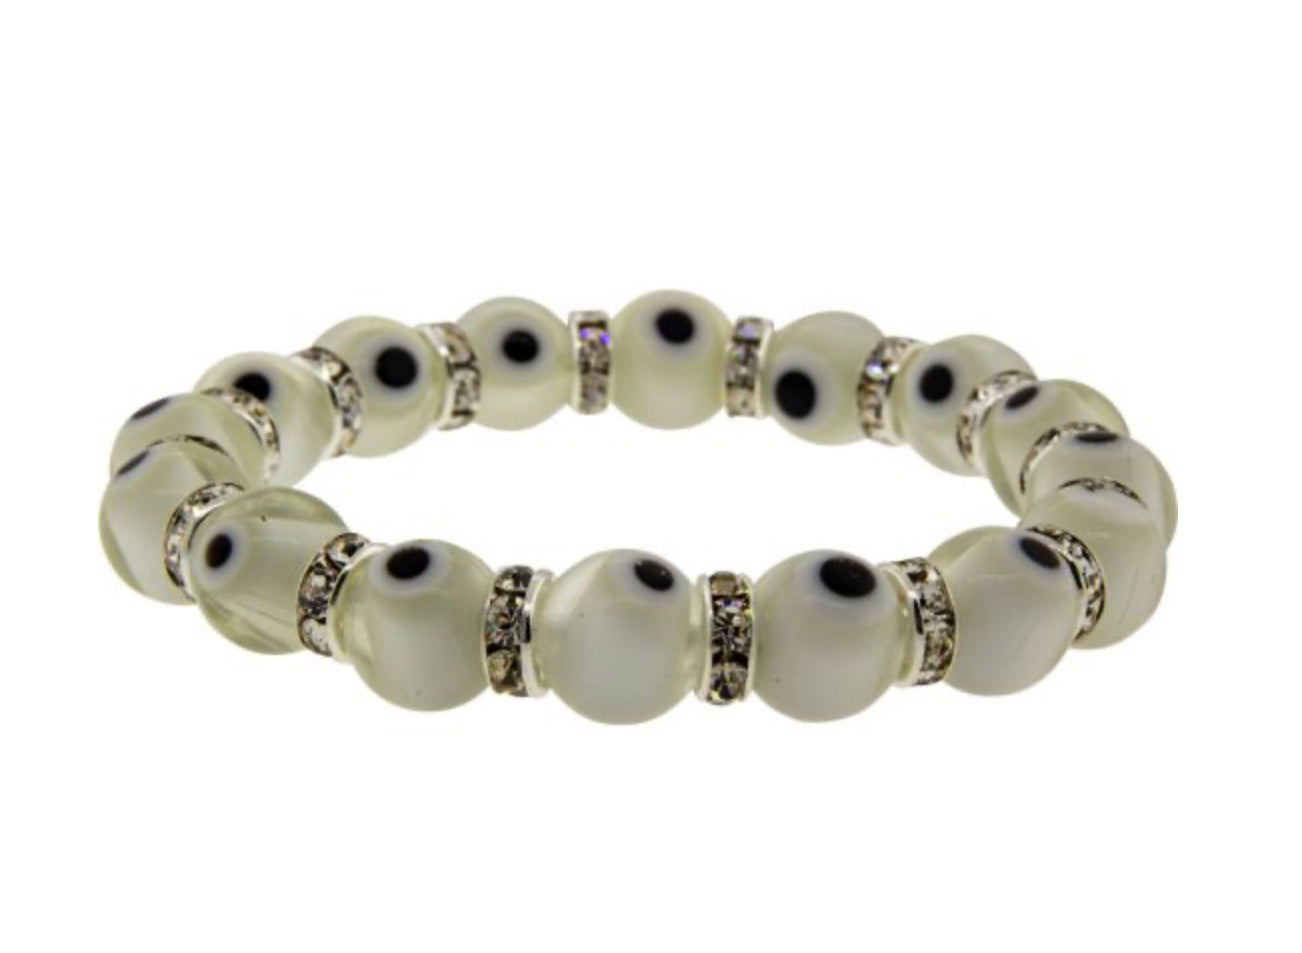 Protect yourself from evil thoughts, spells and ritual with the White Evil Eye bracelet